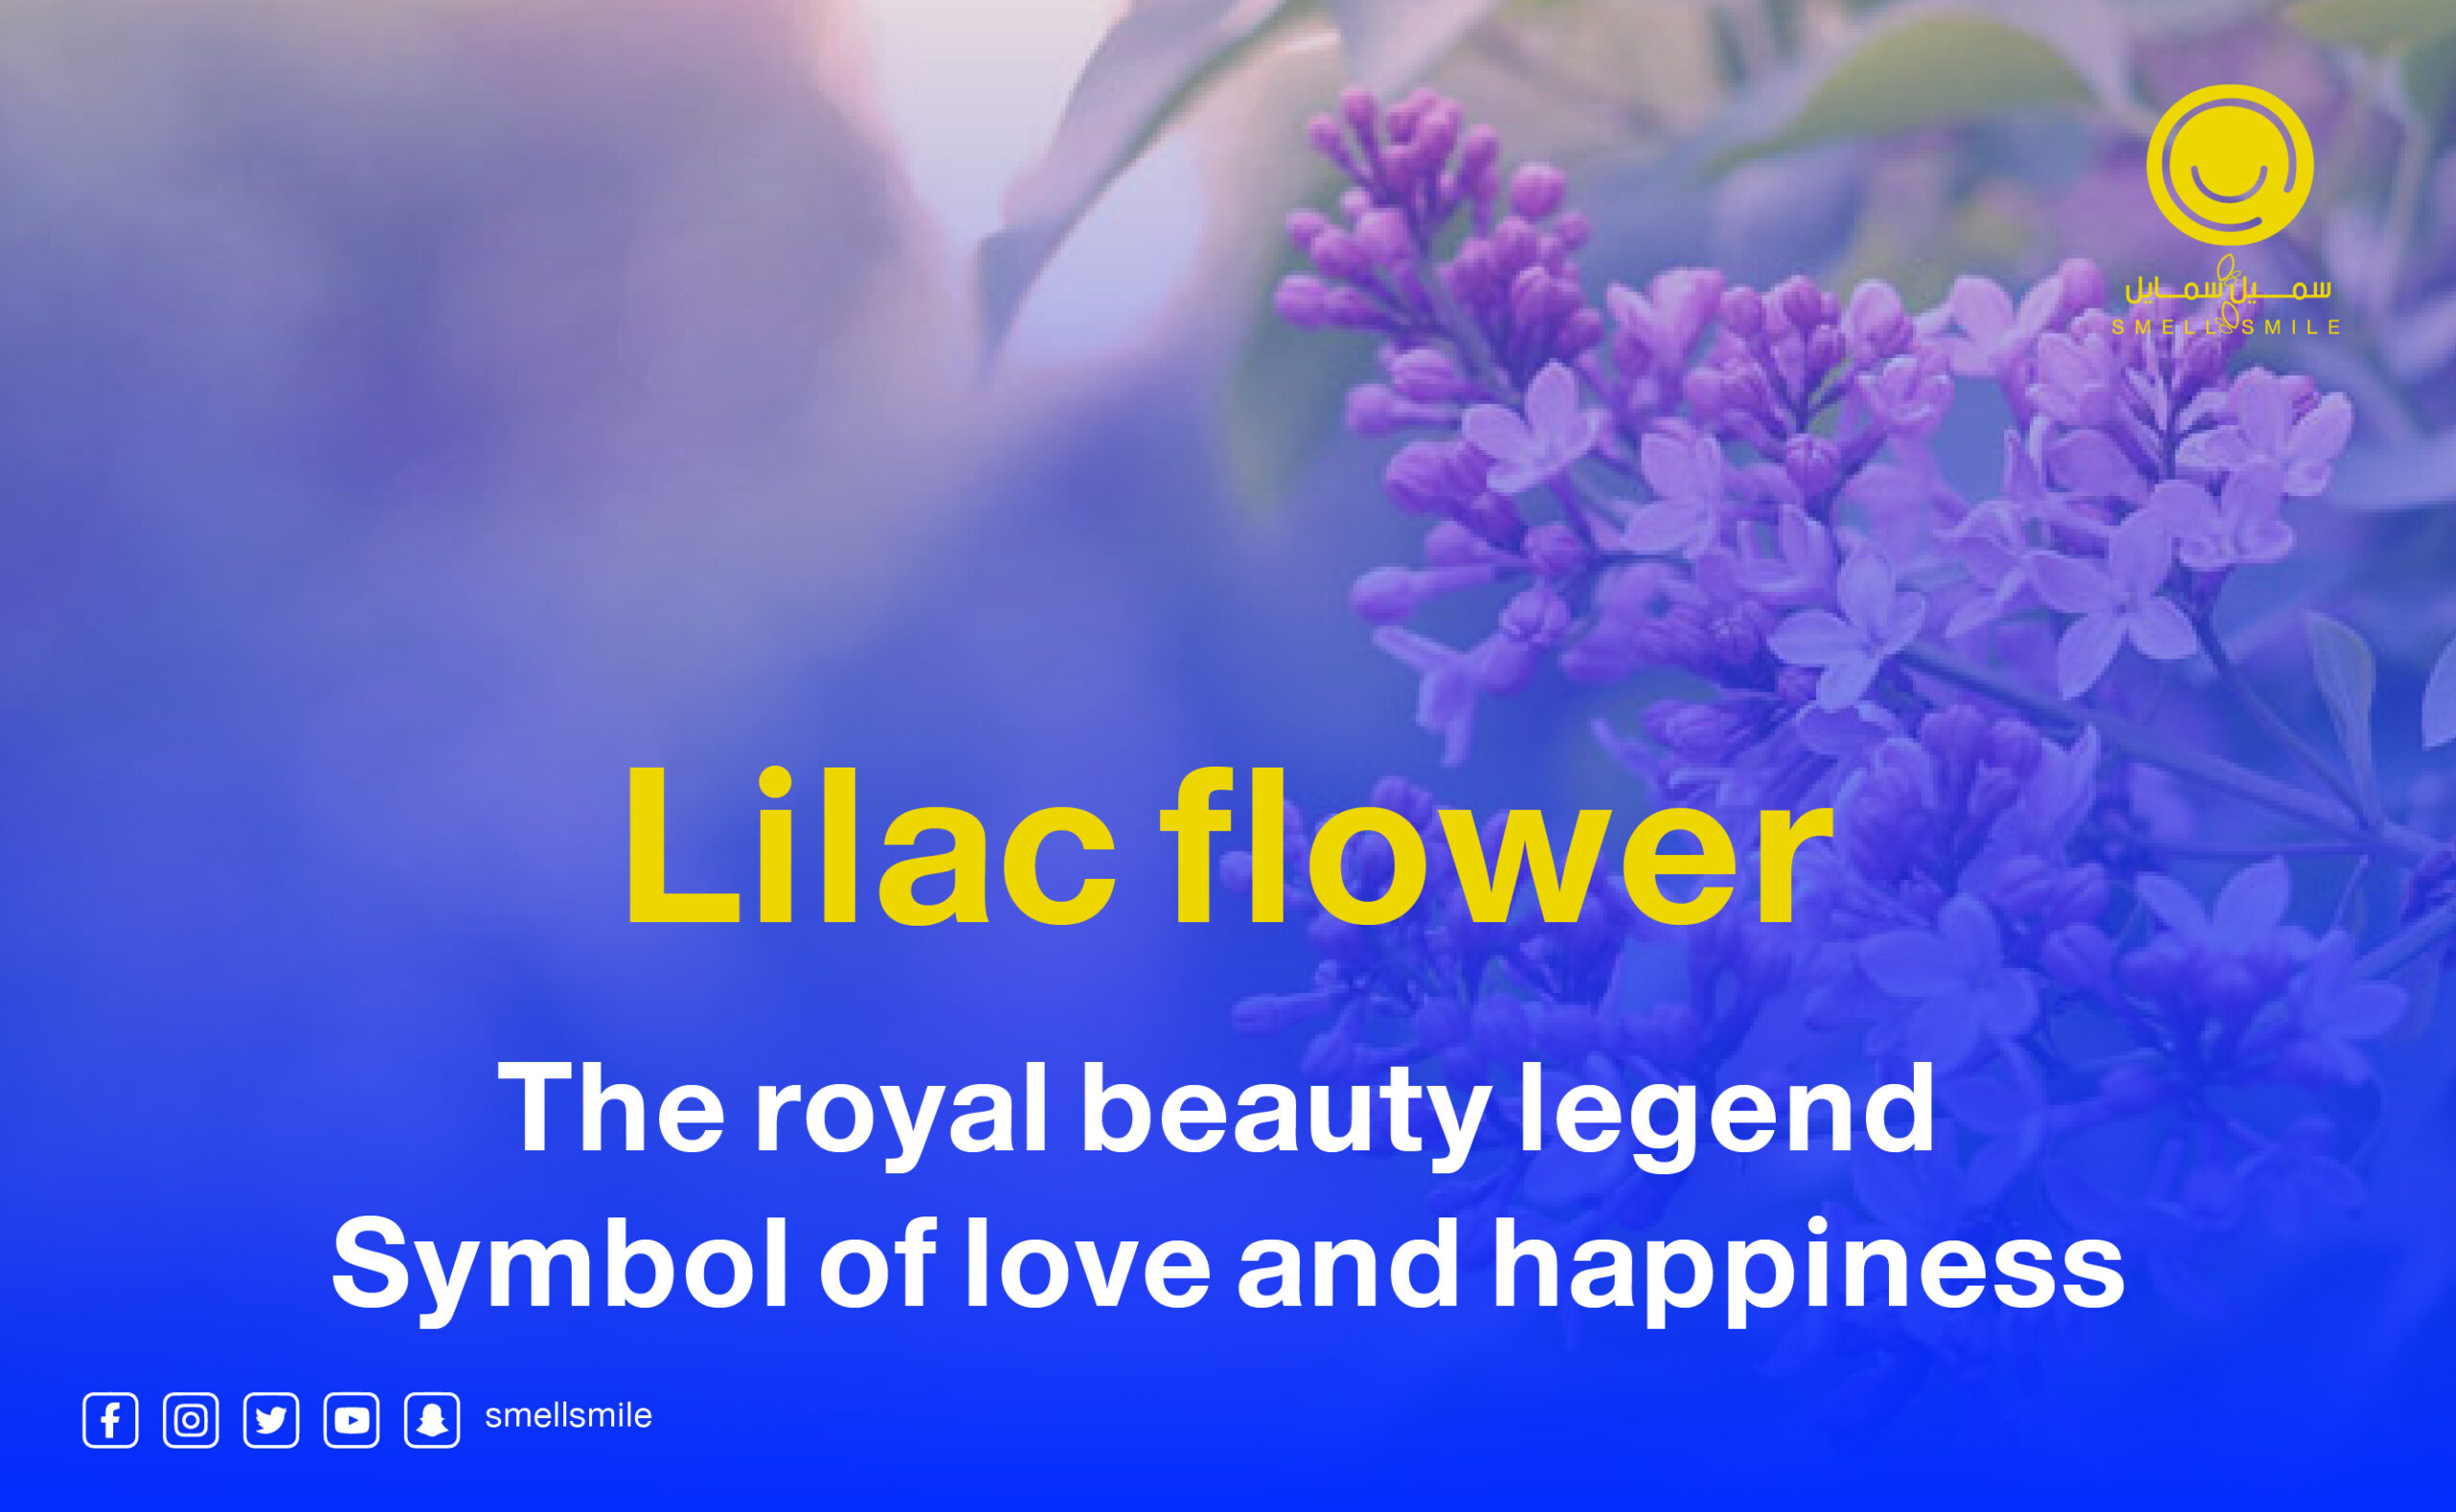 Lilac flower, the legend of royal beauty and the symbol of love, happiness